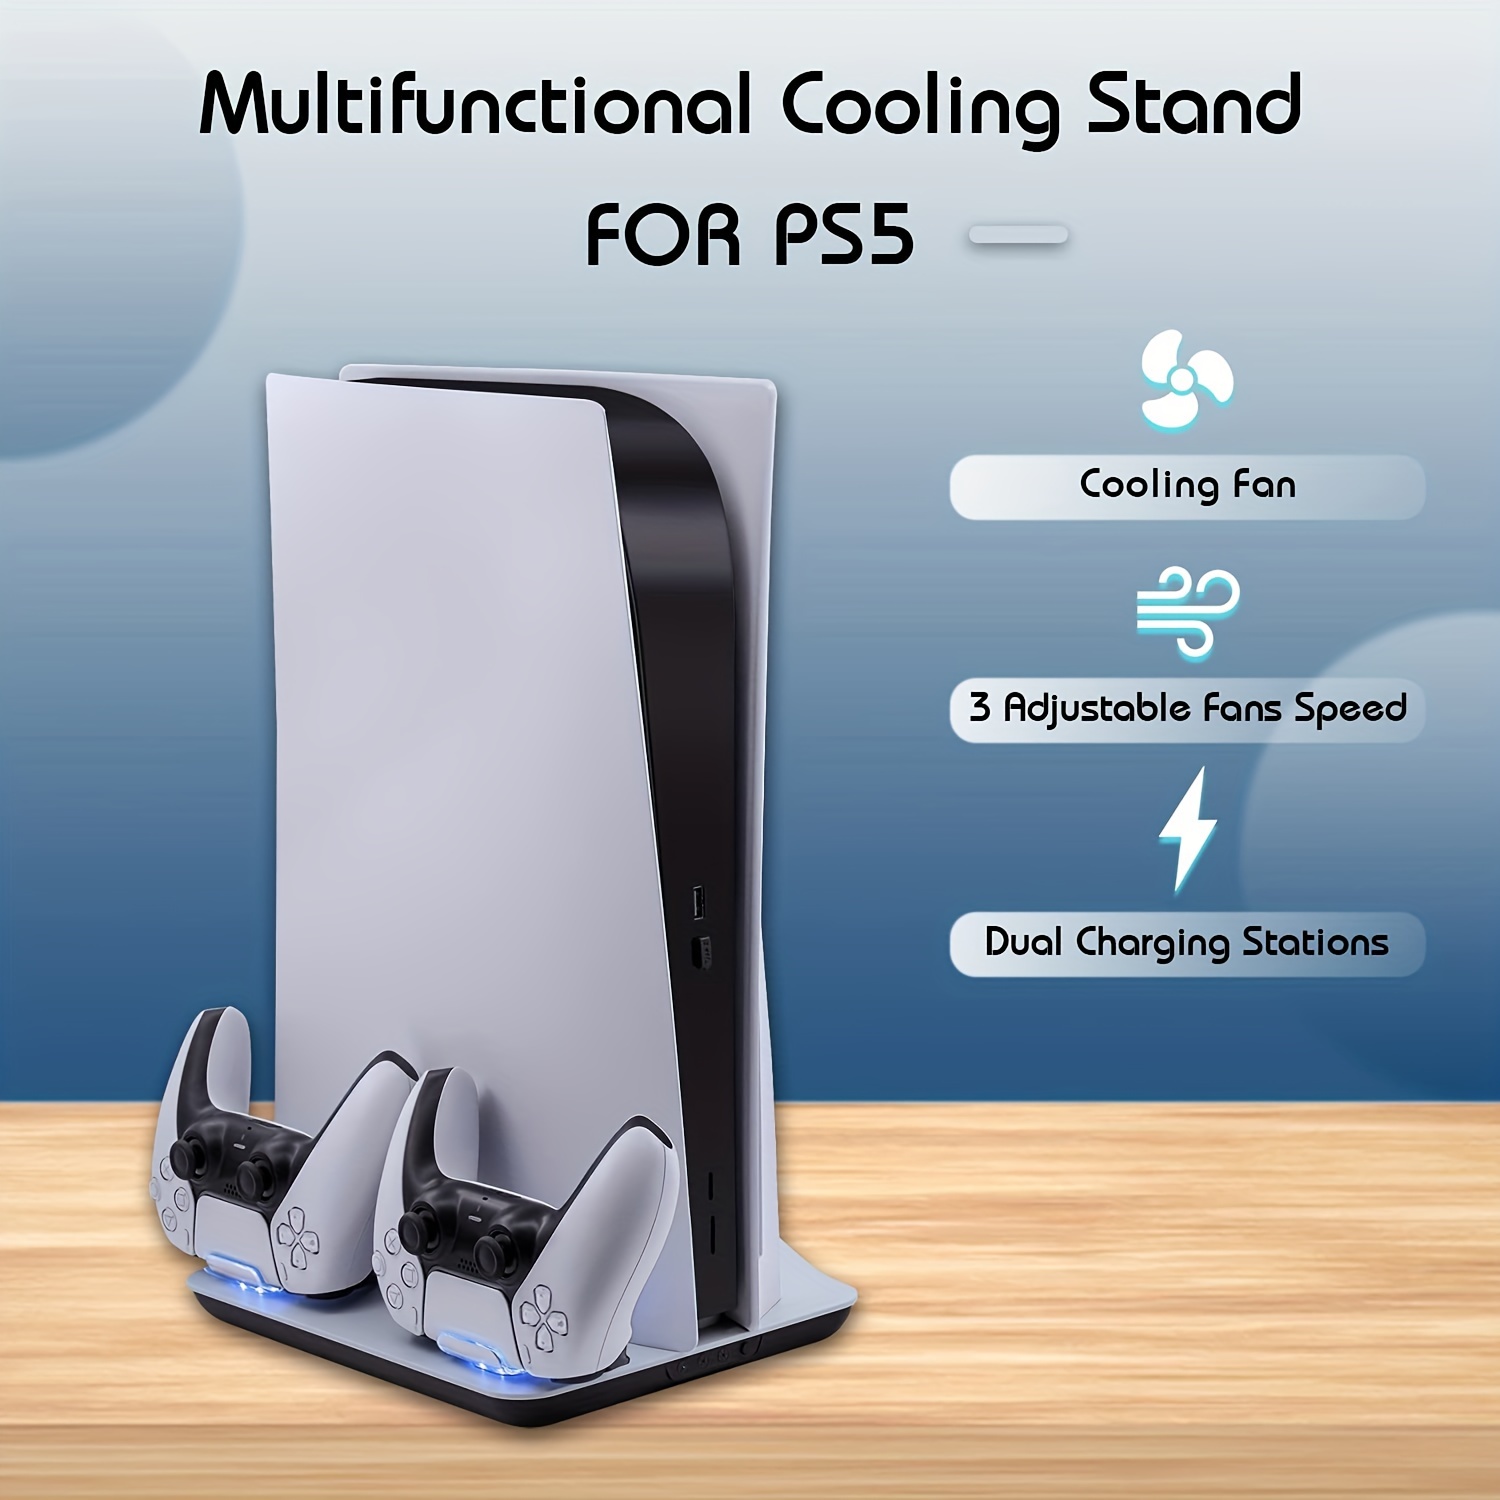 Multifunctional Vertical Console Cooling Stand Controller Charger